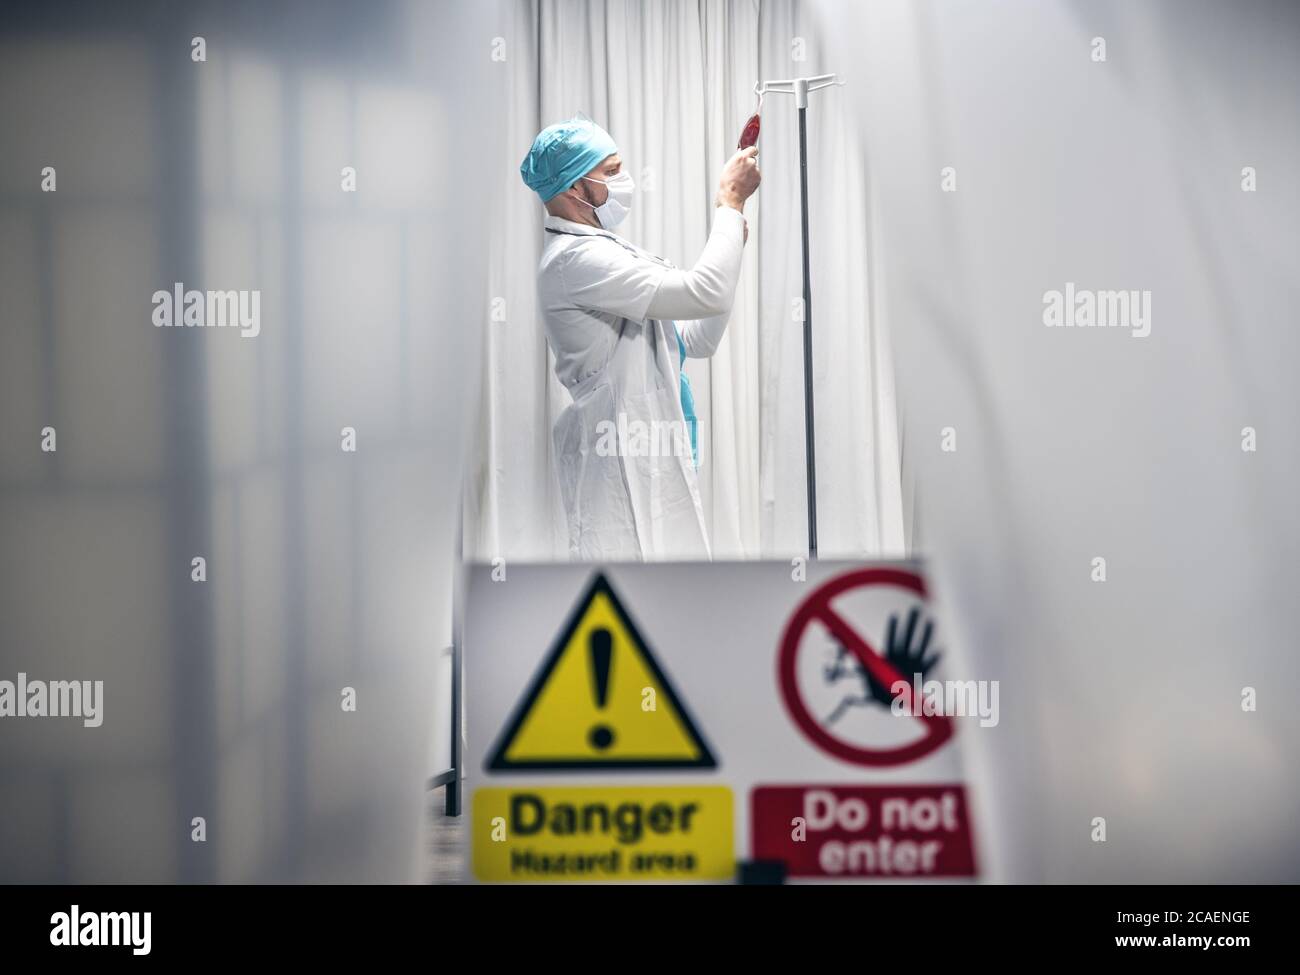 Doctor with protective mask and gloves checks the blood iv before administering it to a patient infected with Corona Virus. Yellow tape, Do Not Enter. Stock Photo